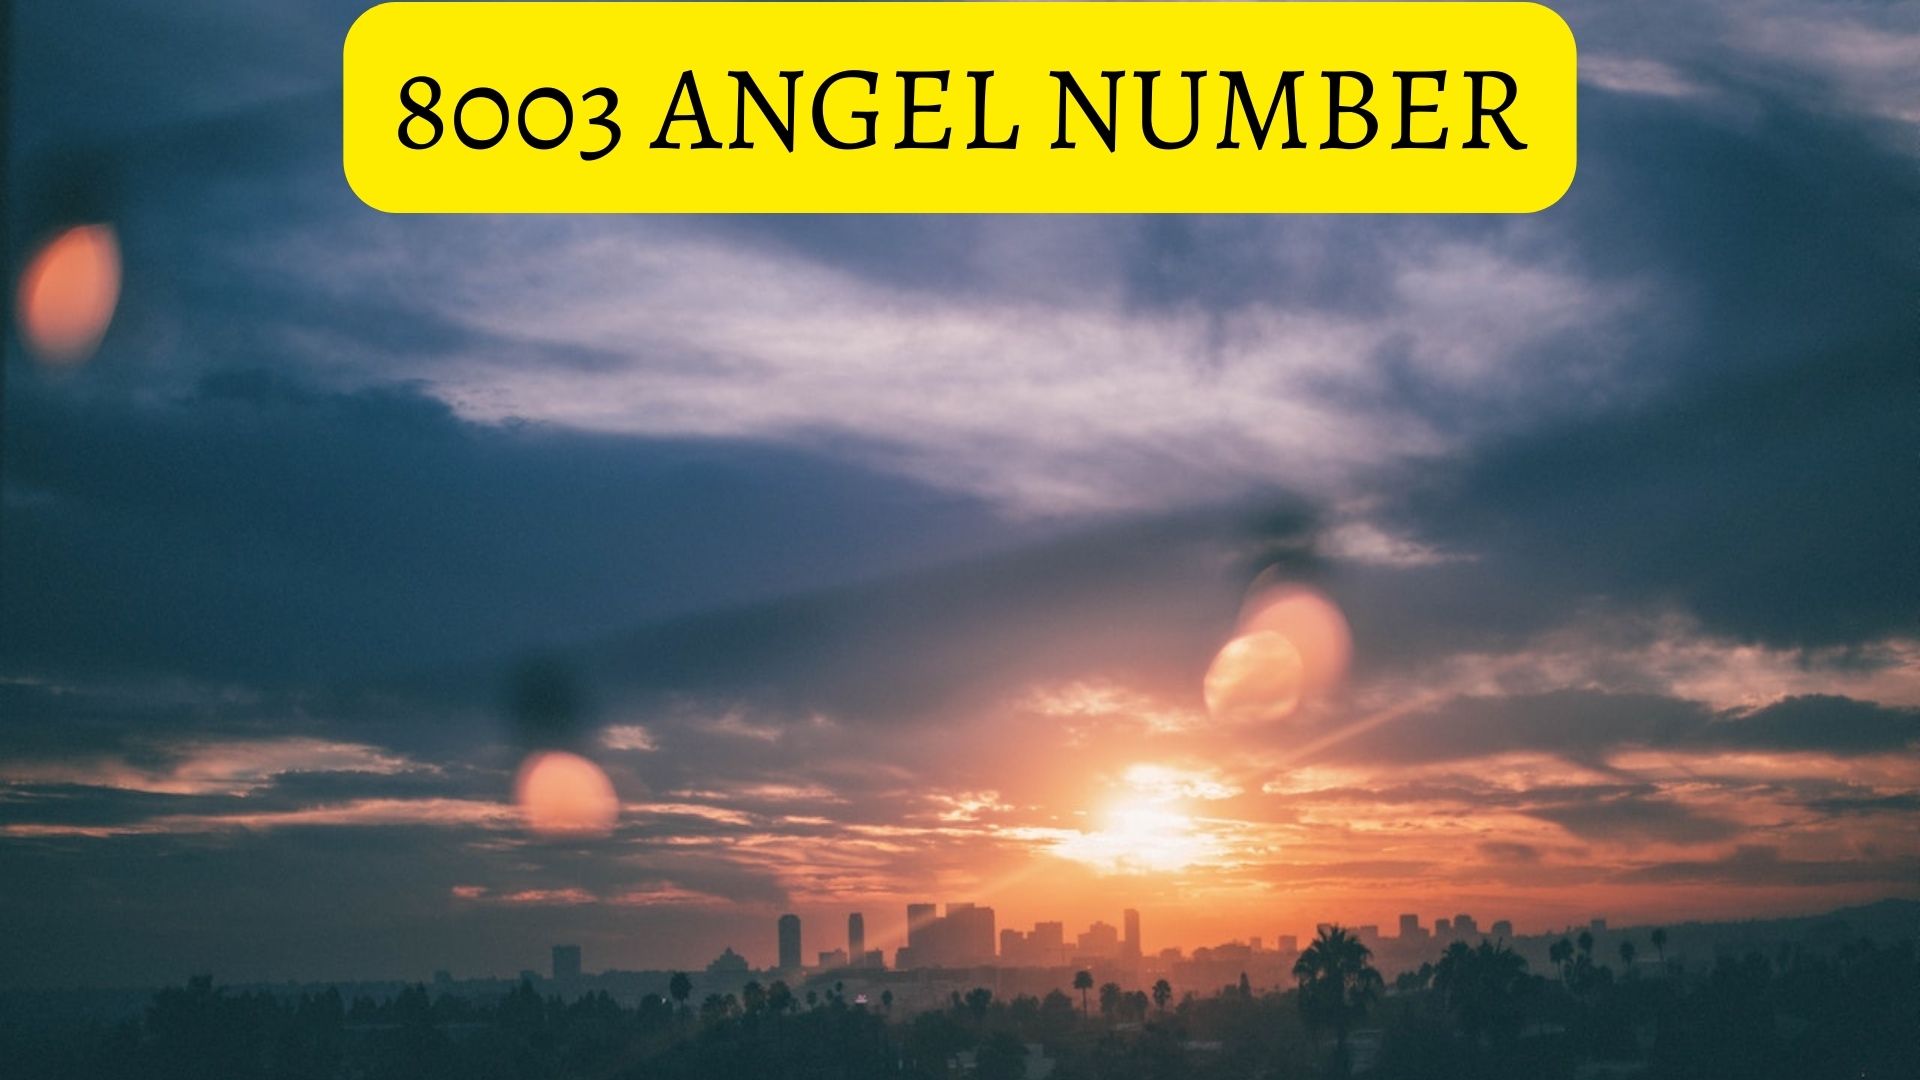 8003 Angel Number - A Transcendence Of Dualities